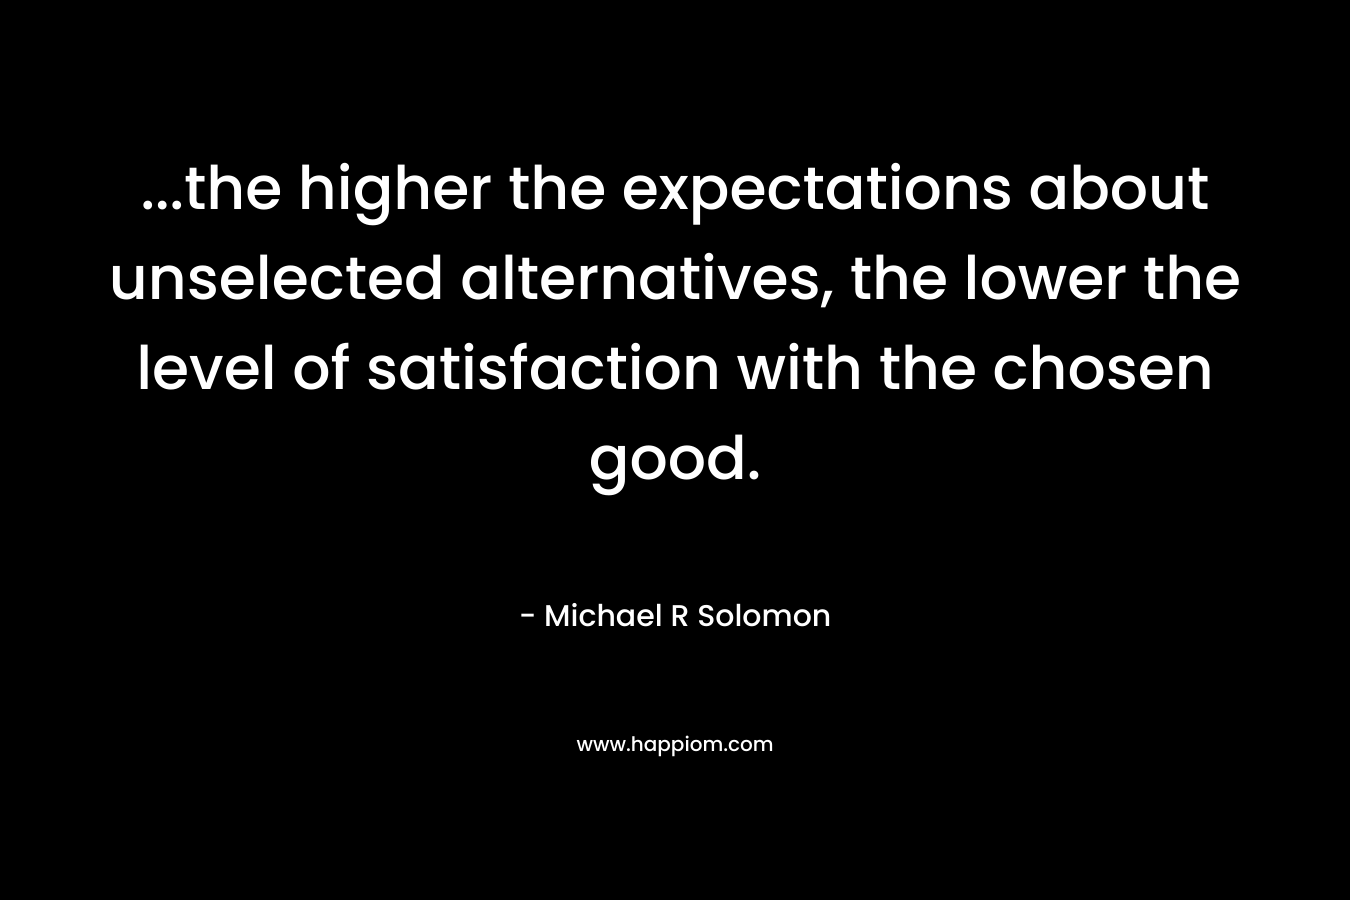 …the higher the expectations about unselected alternatives, the lower the level of satisfaction with the chosen good. – Michael R Solomon